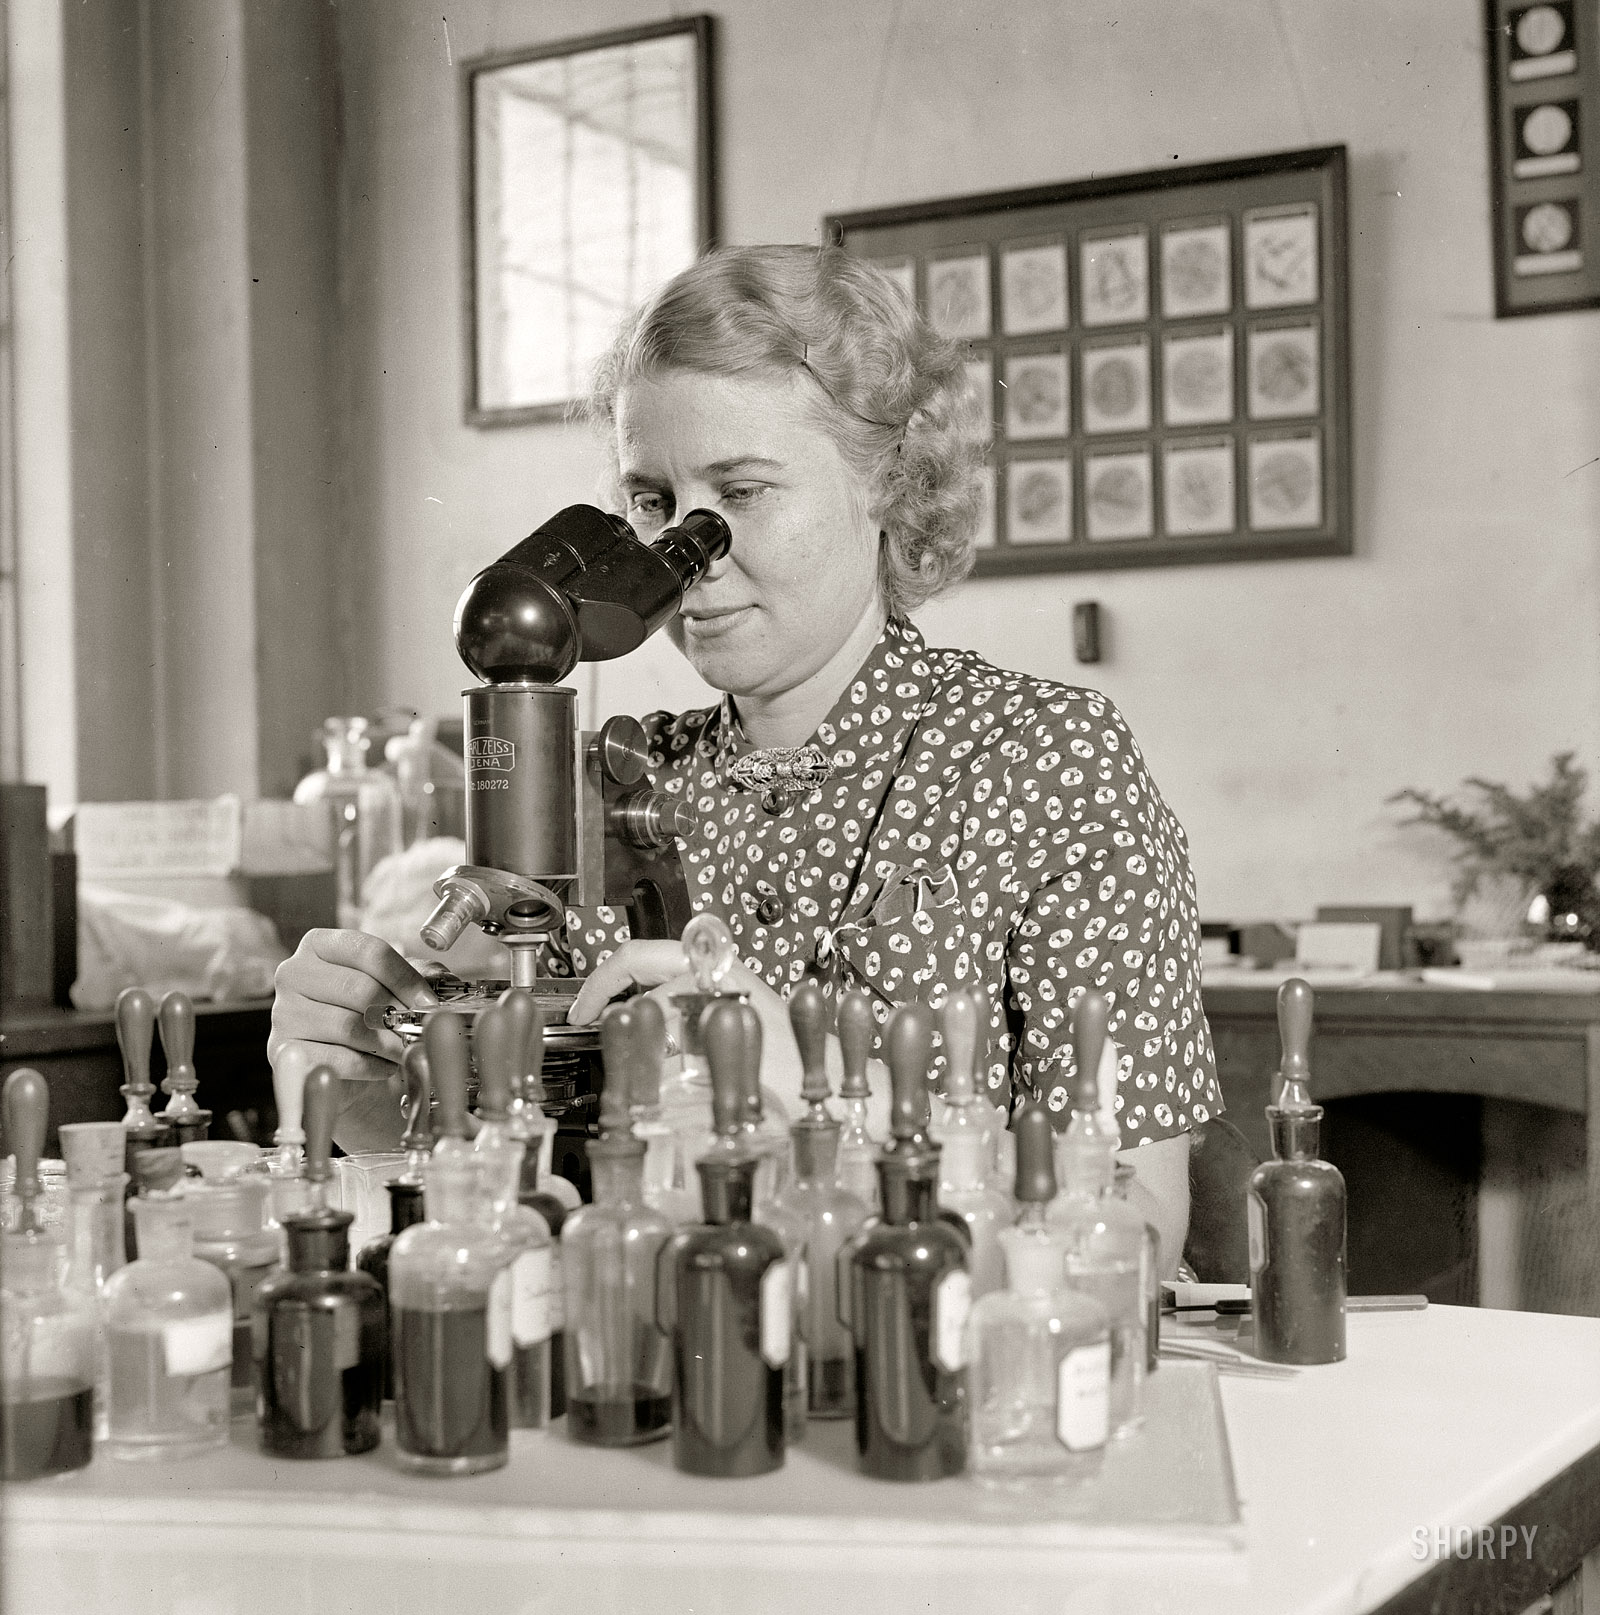 September 28, 1937. "Sees that Uncle Sam gets value in purchases. Miss Mary L. Rollins is responsible for seeing that the government gets value received for every dollar expended for paper and materials containing textile fibers. As fiber technologist of the National Bureau of Standards in Washington, she makes microscopic tests of typewriter paper, memo pads, envelopes, police uniforms, chair cushions, flags, etc. to determine whether the articles are delivered are represented when purchased." Harris & Ewing glass negative. View full size.